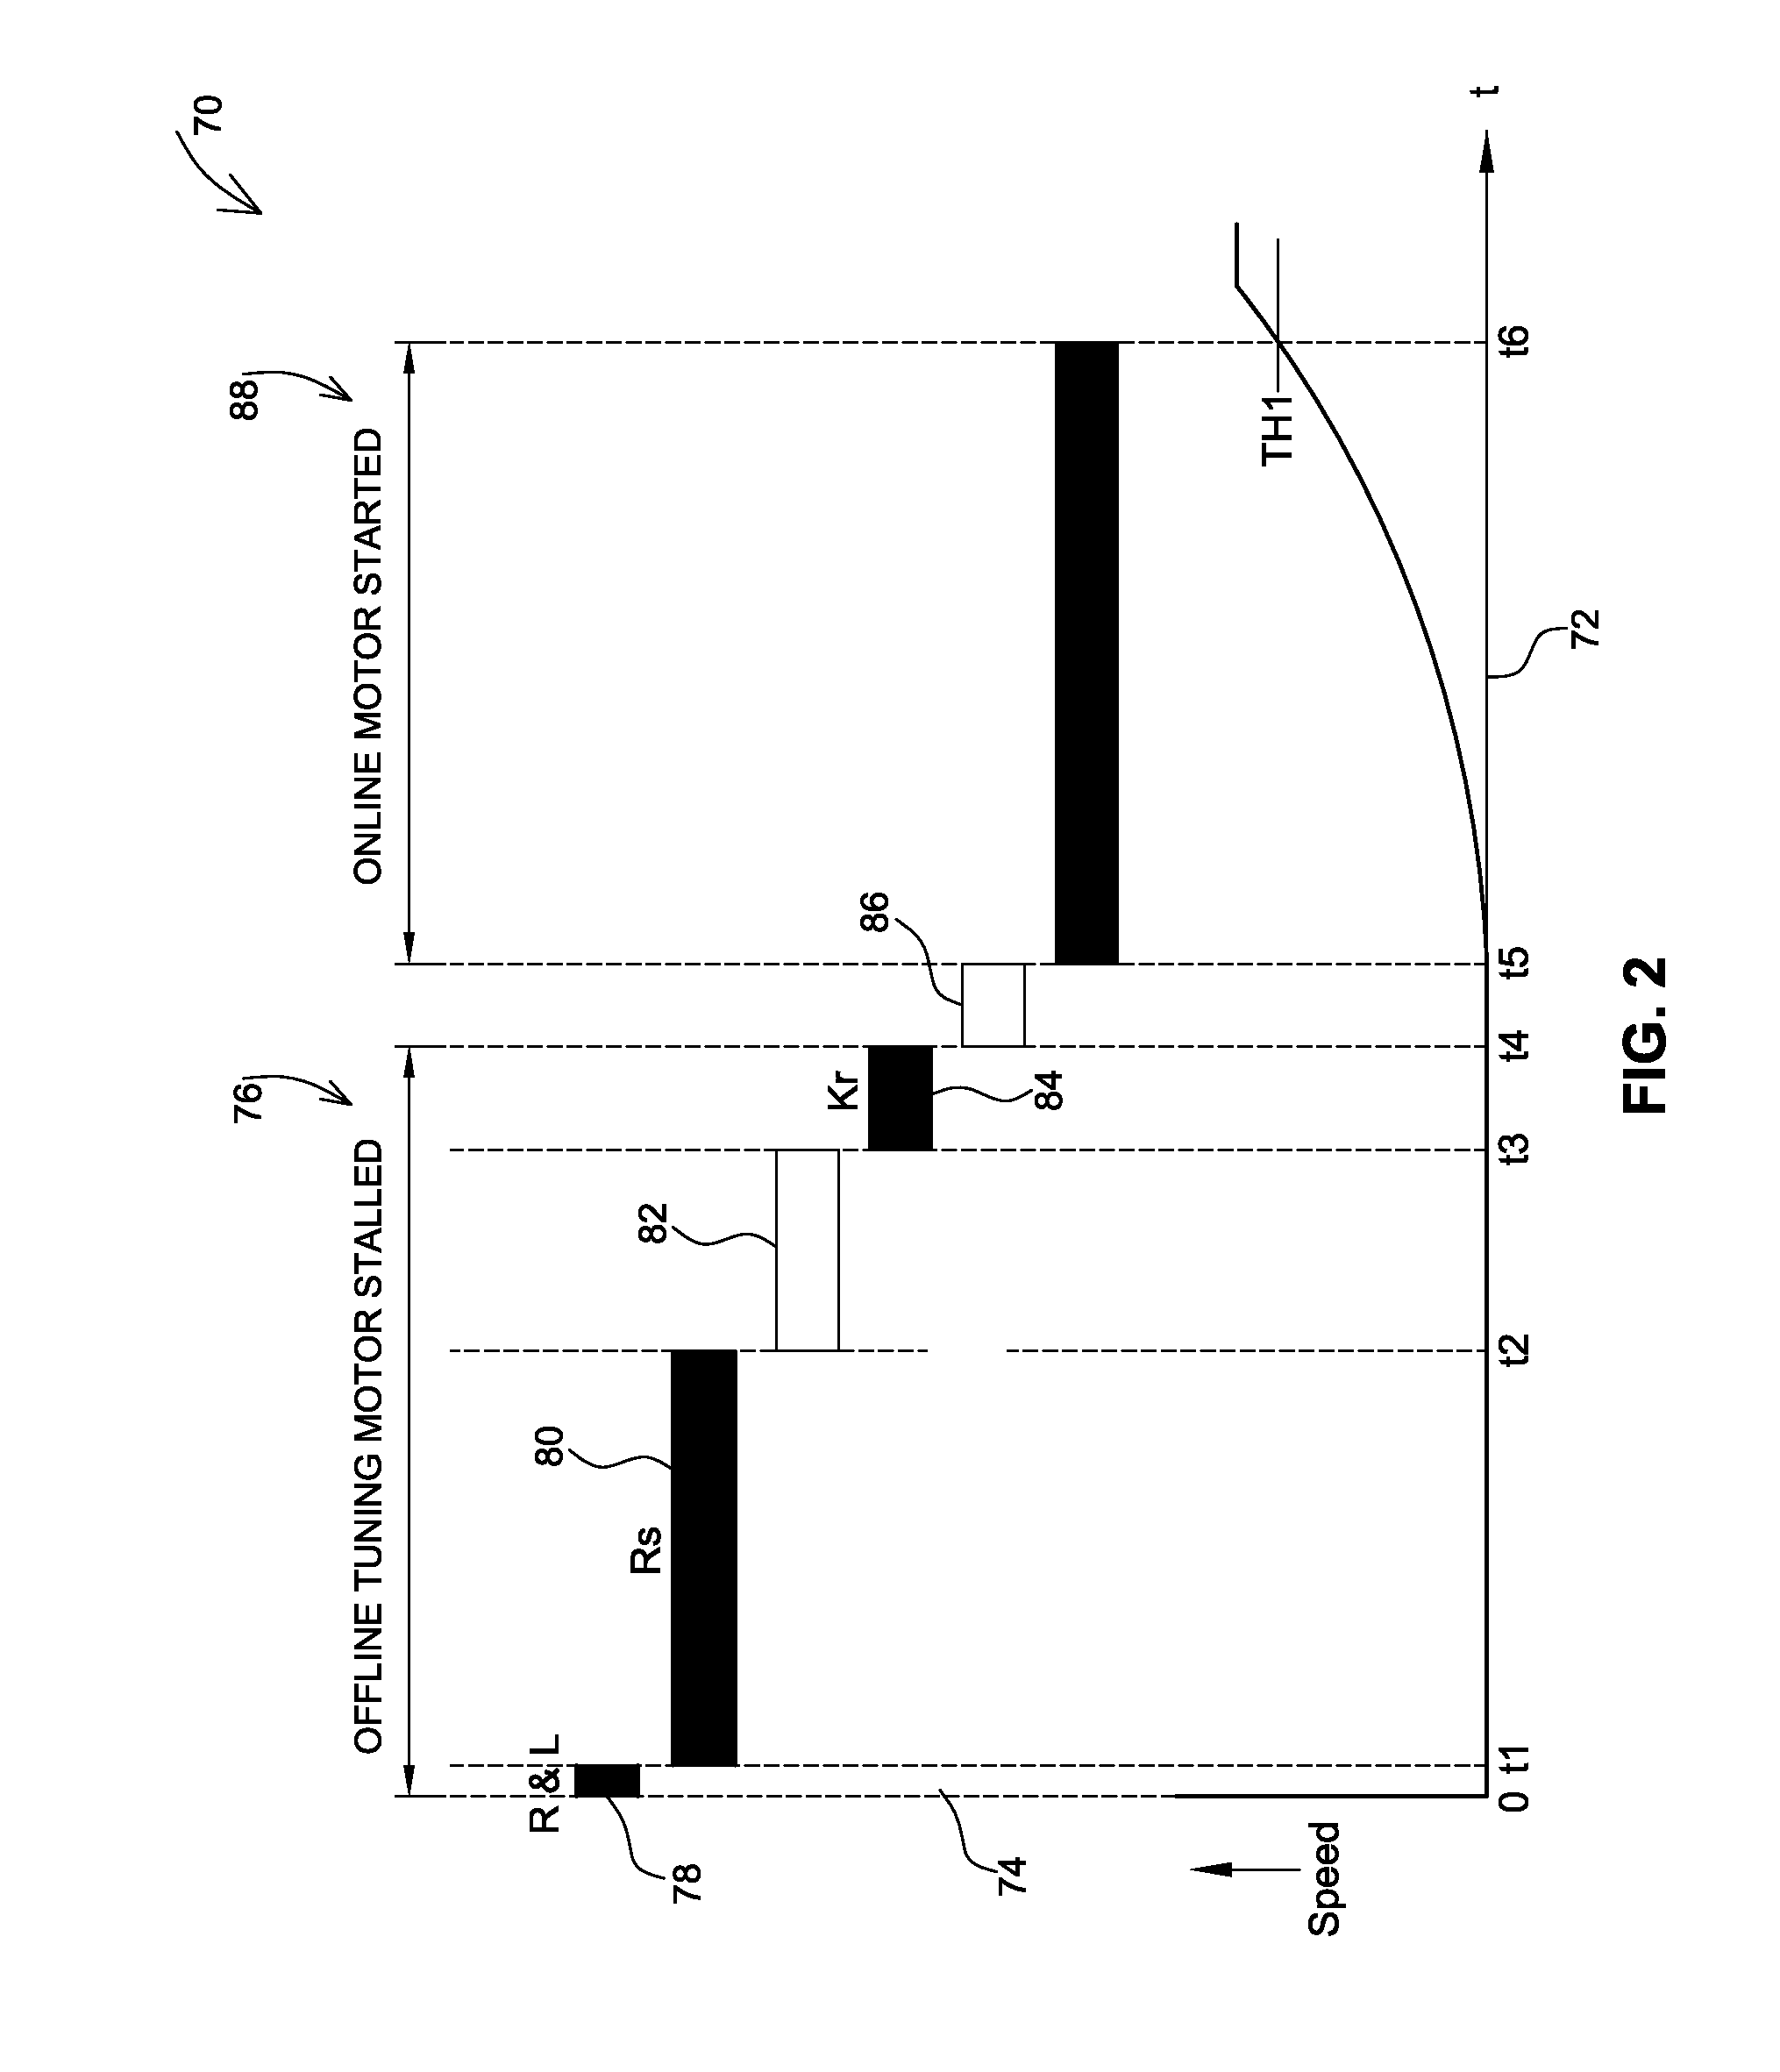 Parameter estimation system and method for an induction motor